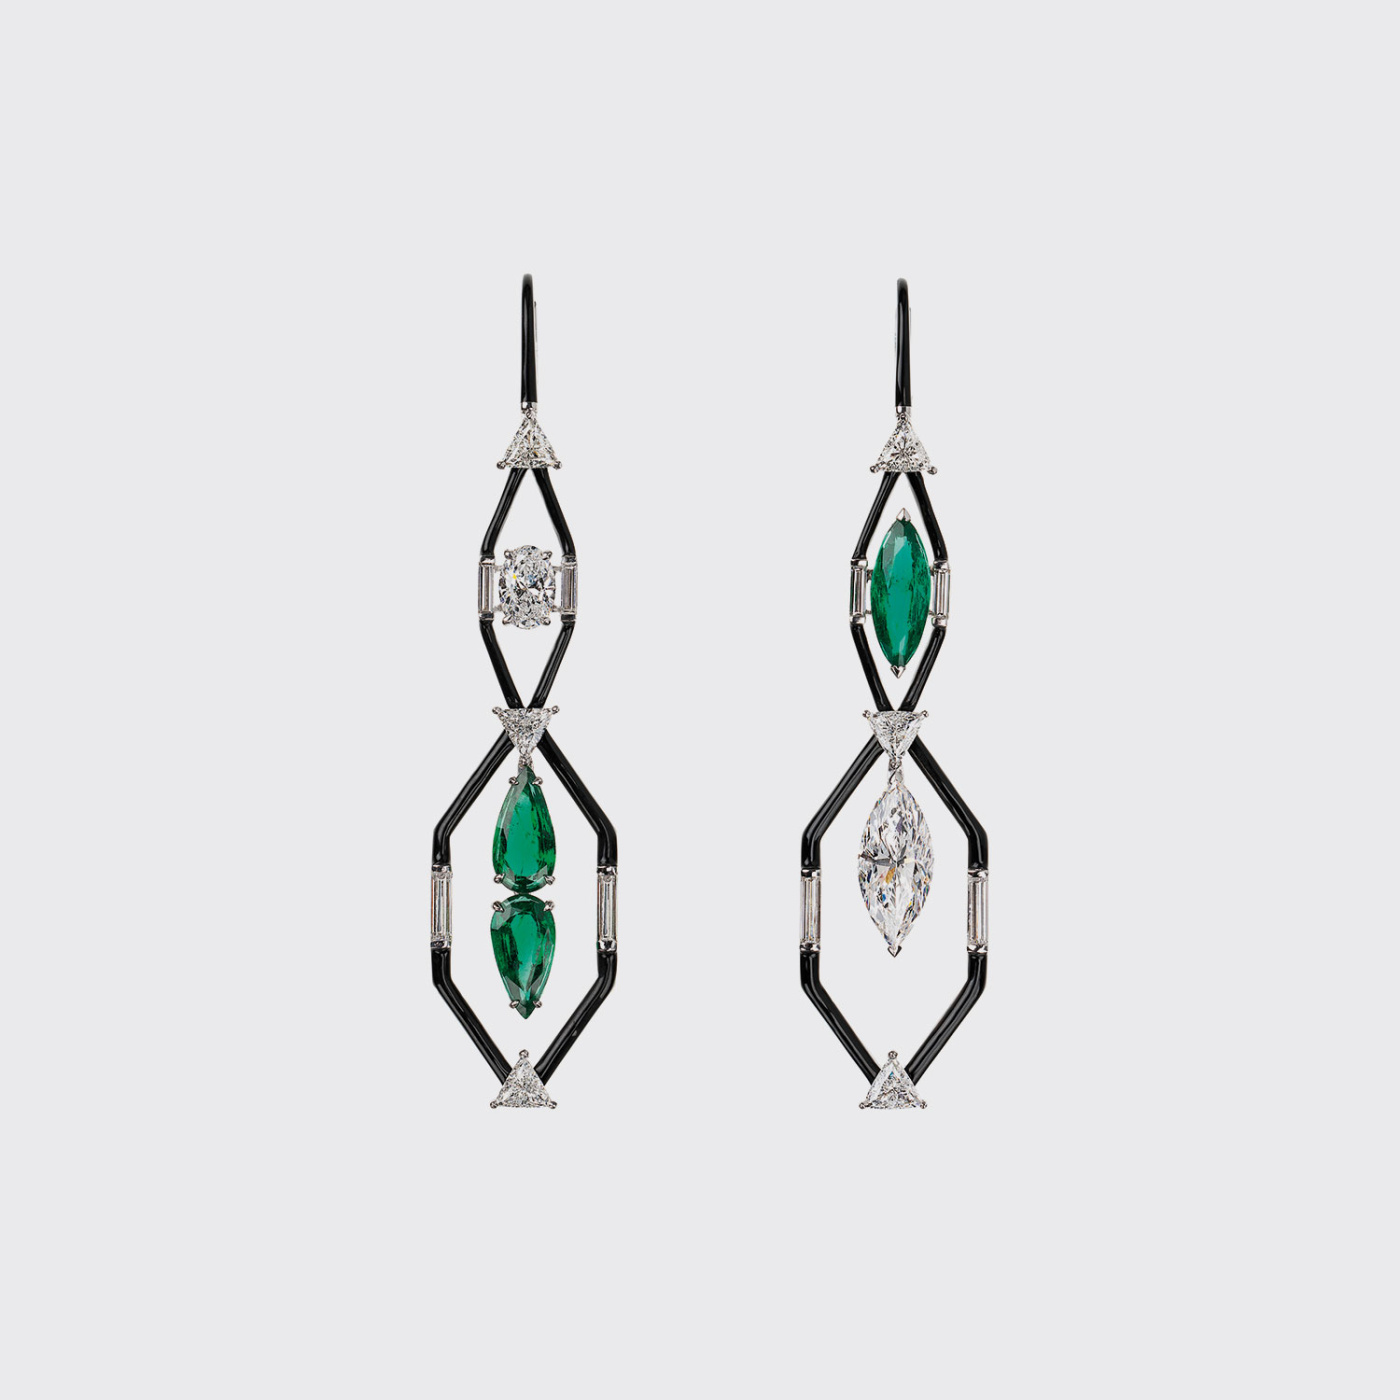 White gold mismatched long earrings with emeralds and white diamonds and black enamel